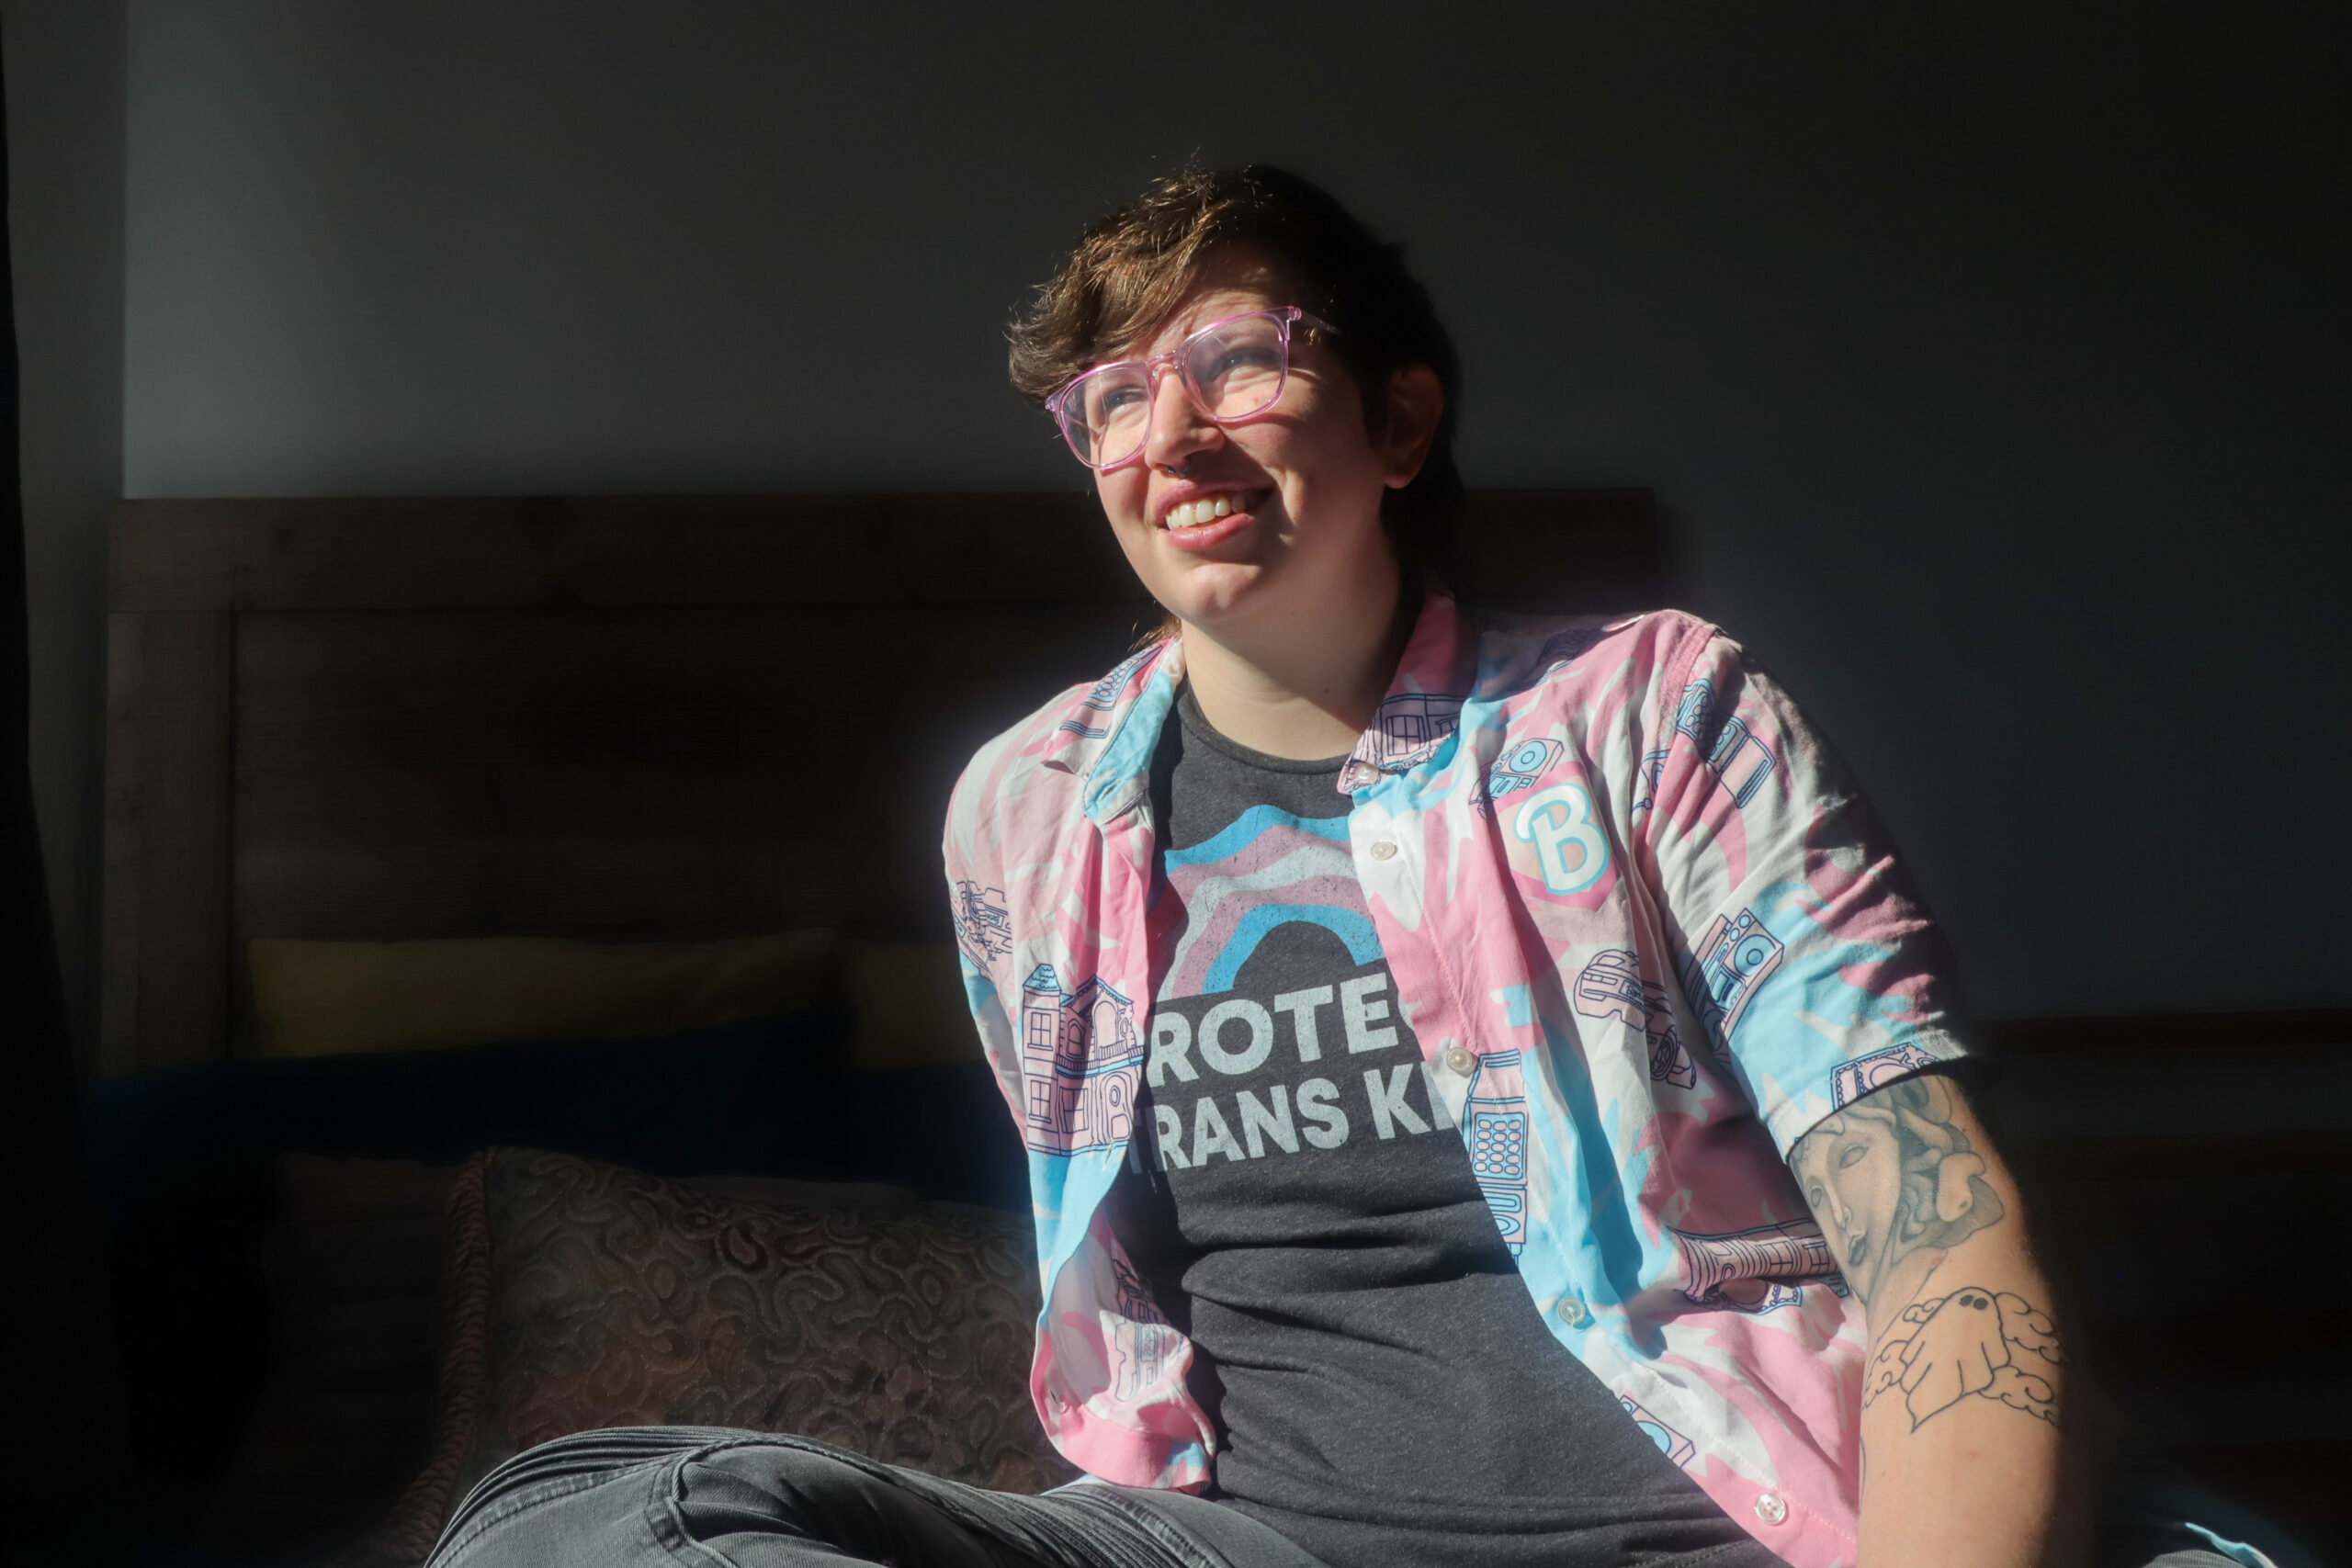 A person with glasses, a pink and blue collared shirt, and a t-shirt that reads "PROTECT TRANS KIDS" sits on the edge of a bed.